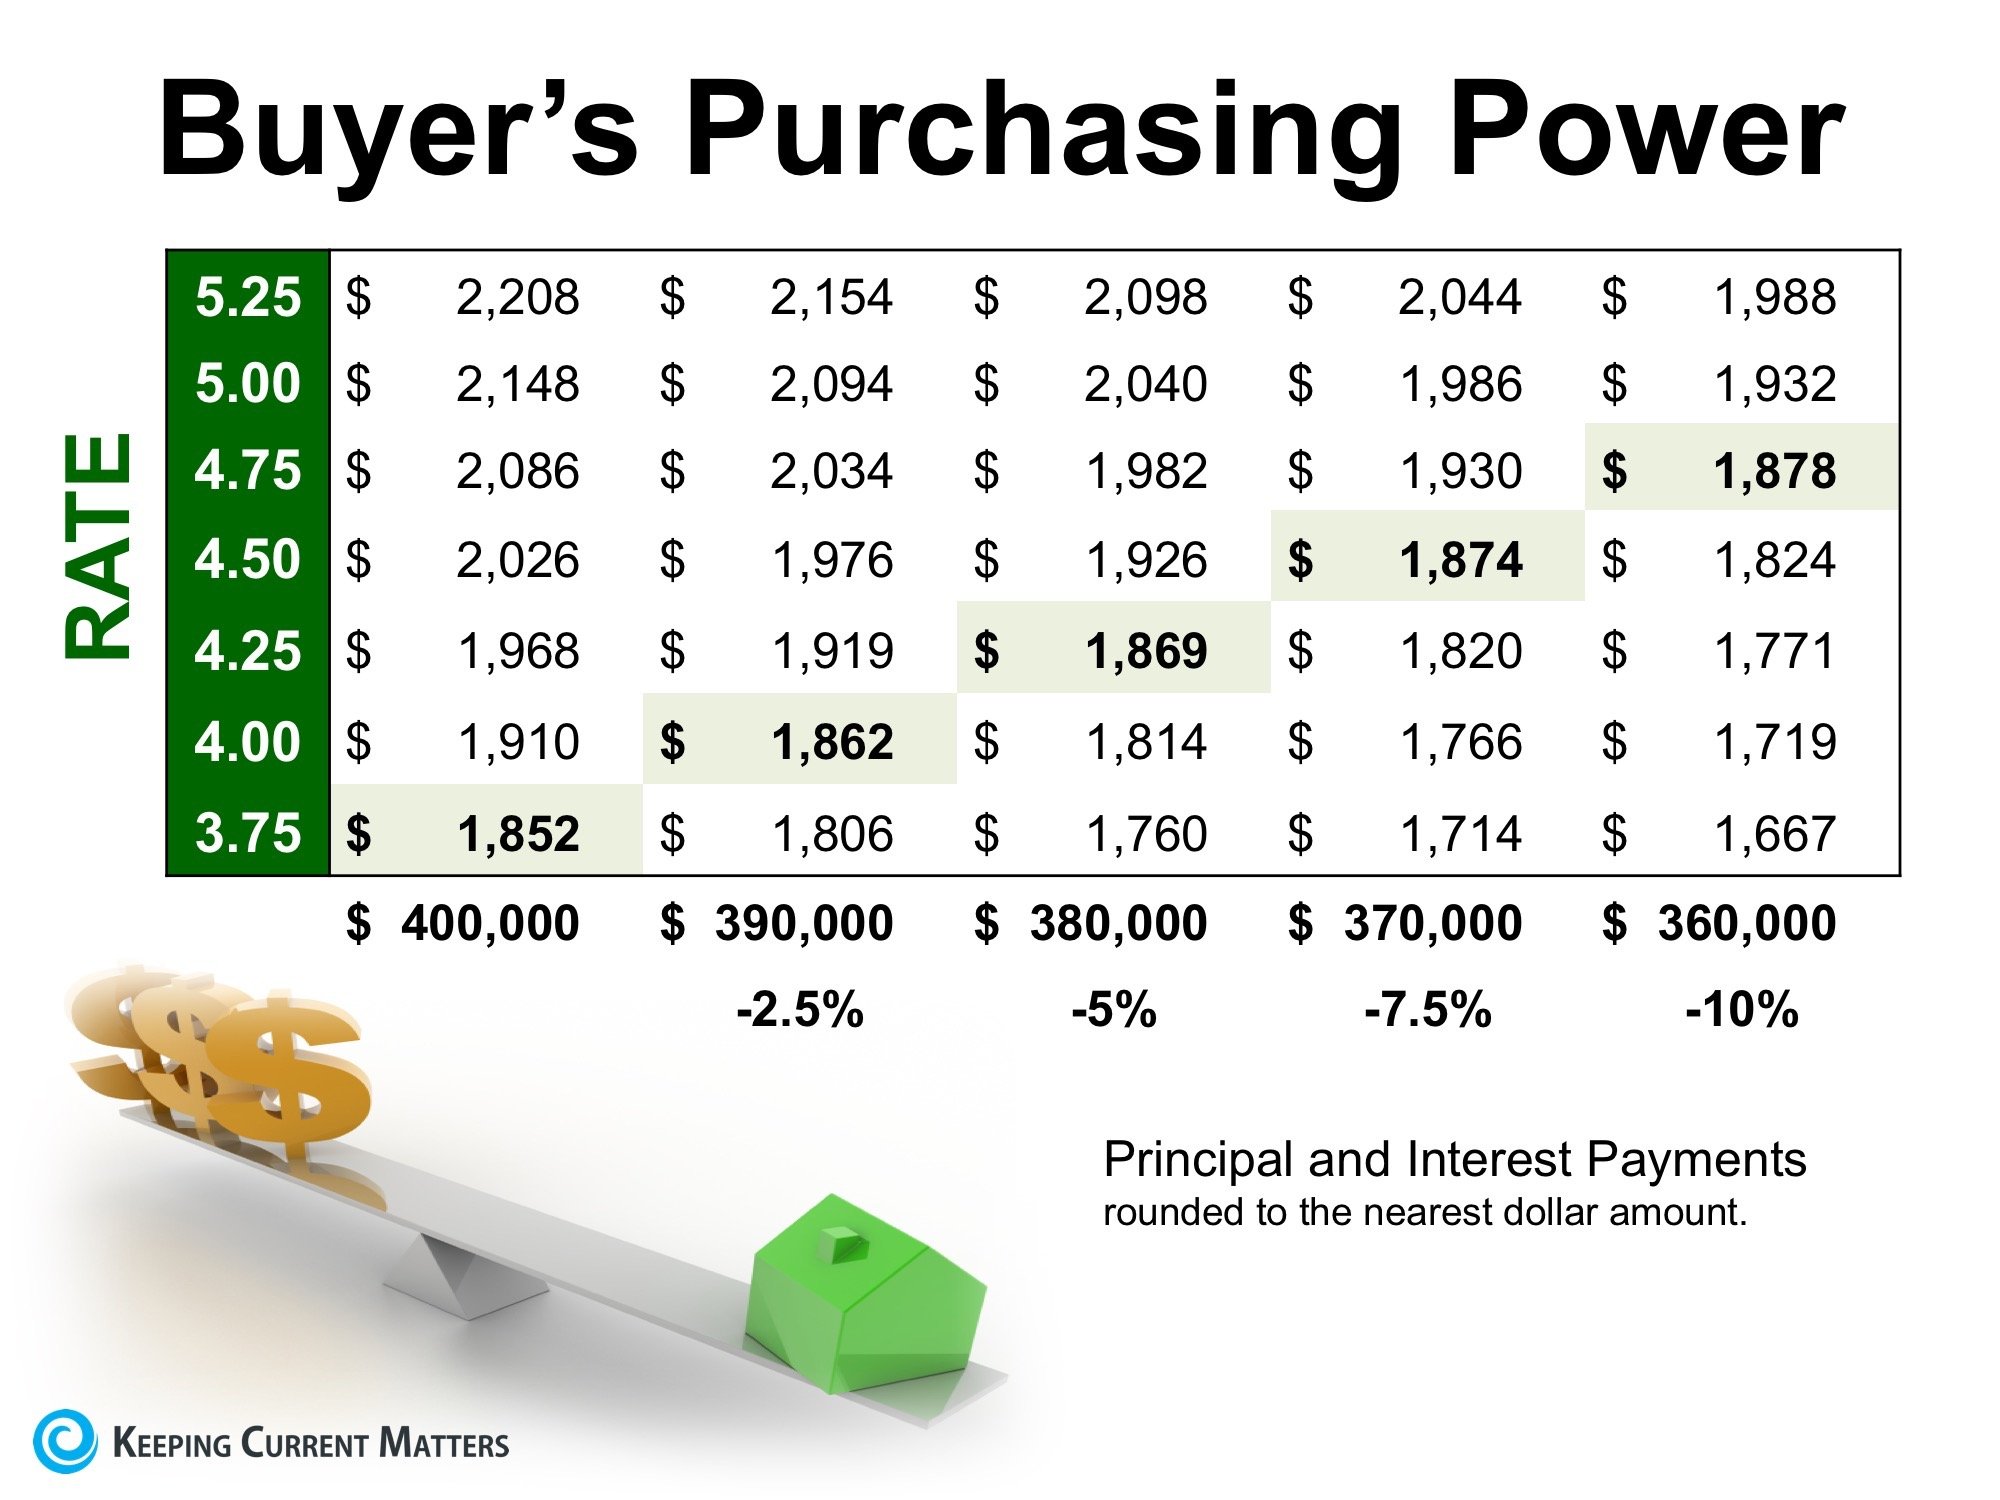 Low Interest Rates Have a High Impact on Your Purchasing Power | Keeping Current Matters